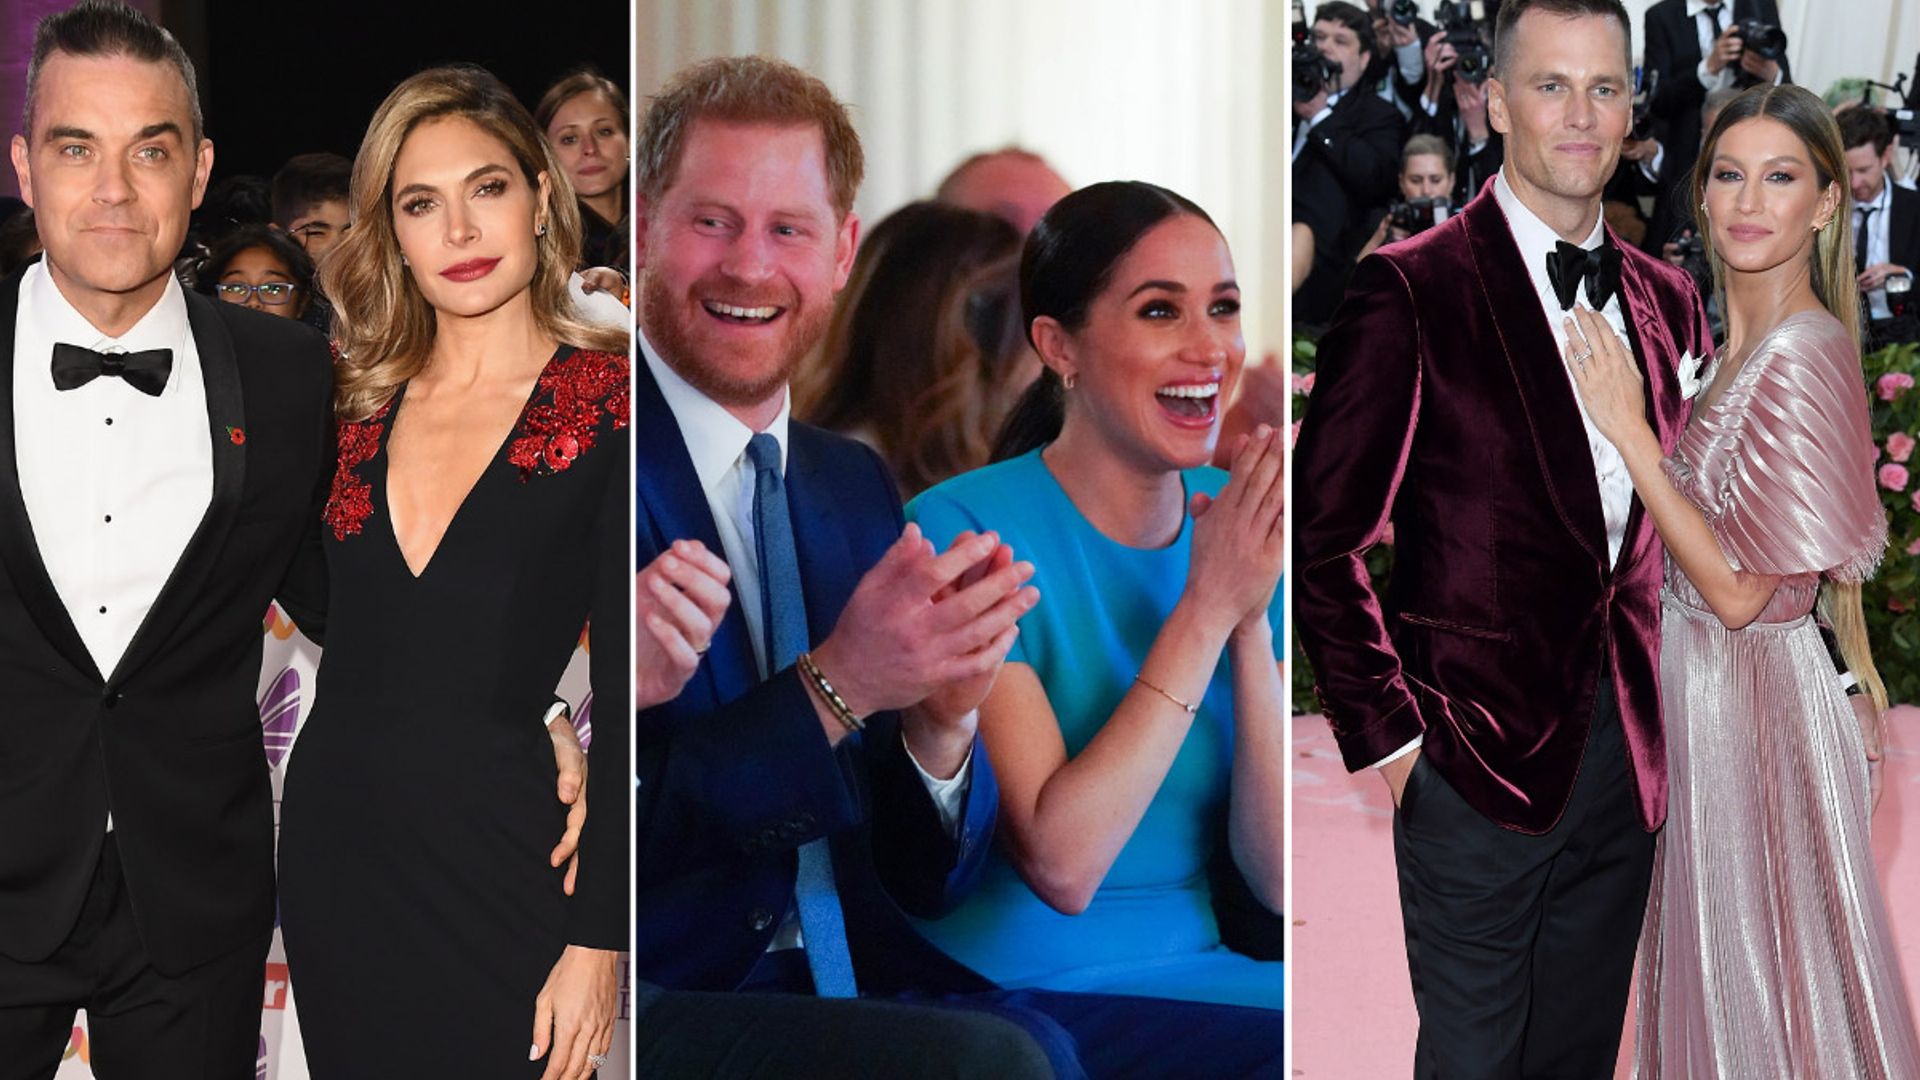 Celebrity couples who met on blind dates like Prince Harry and Meghan Markle